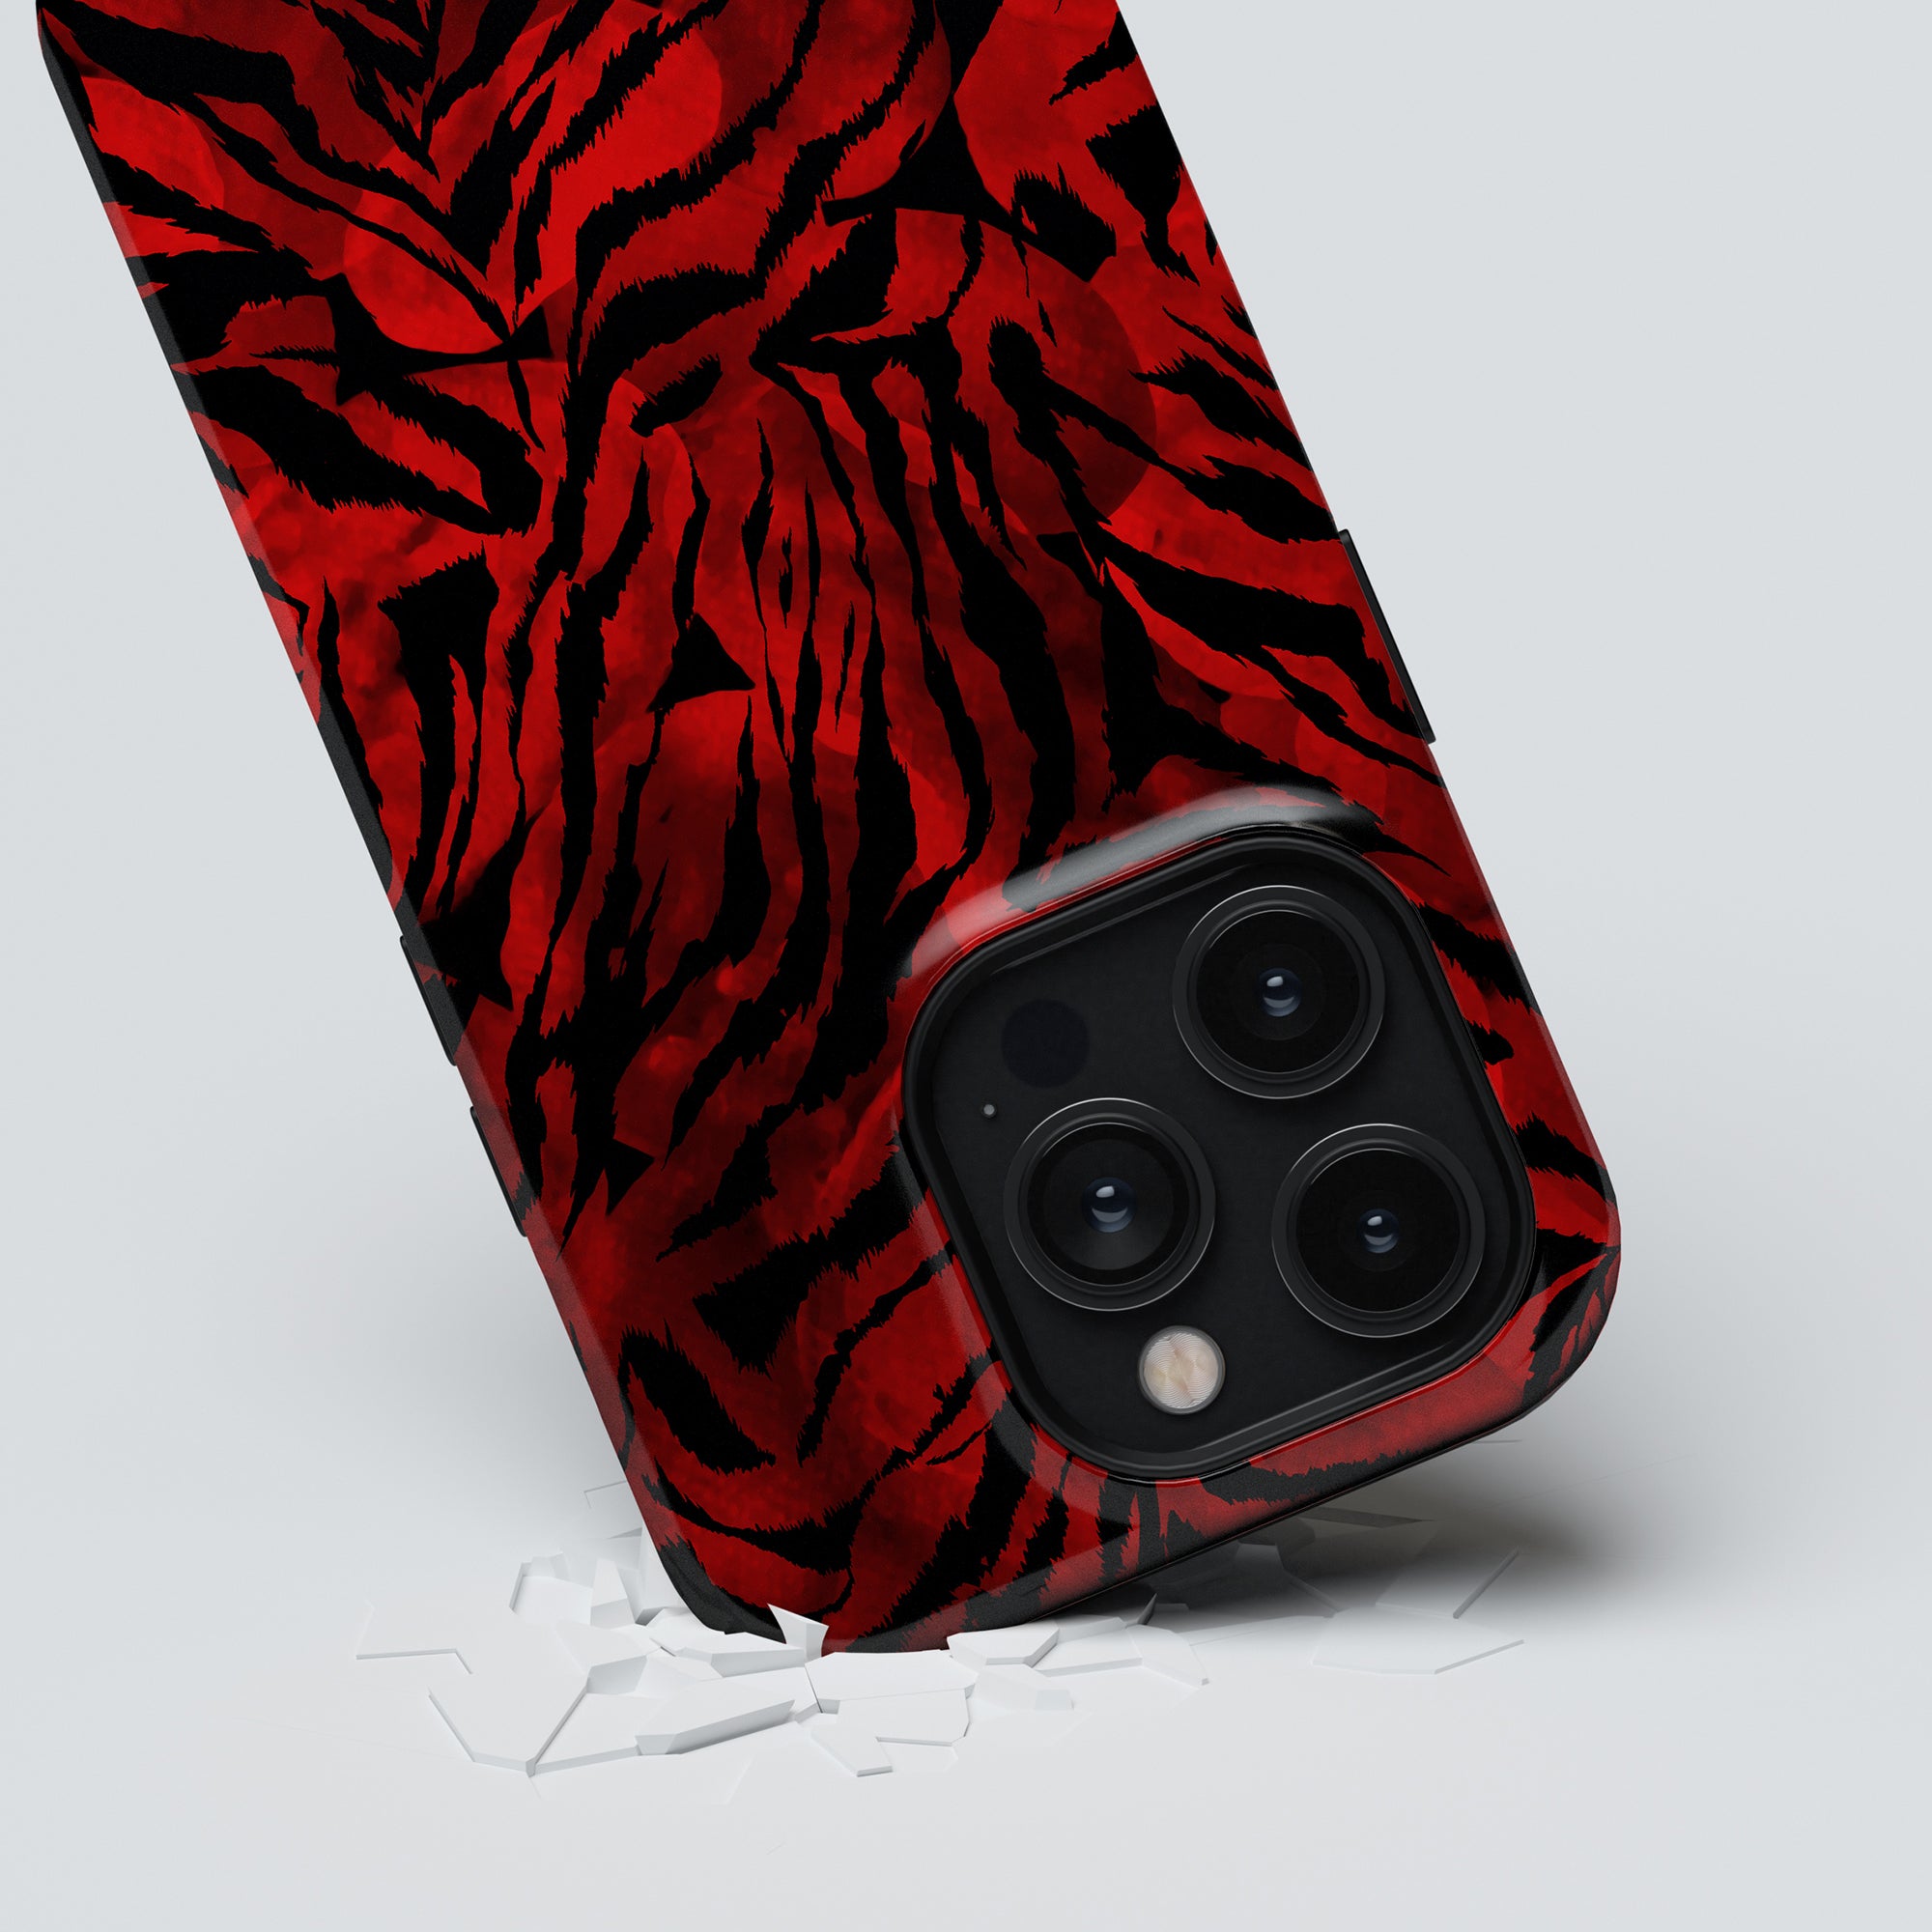 A vibrant Blood Tiger - Tough Case for the iPhone 11, featuring bold red and black colors.